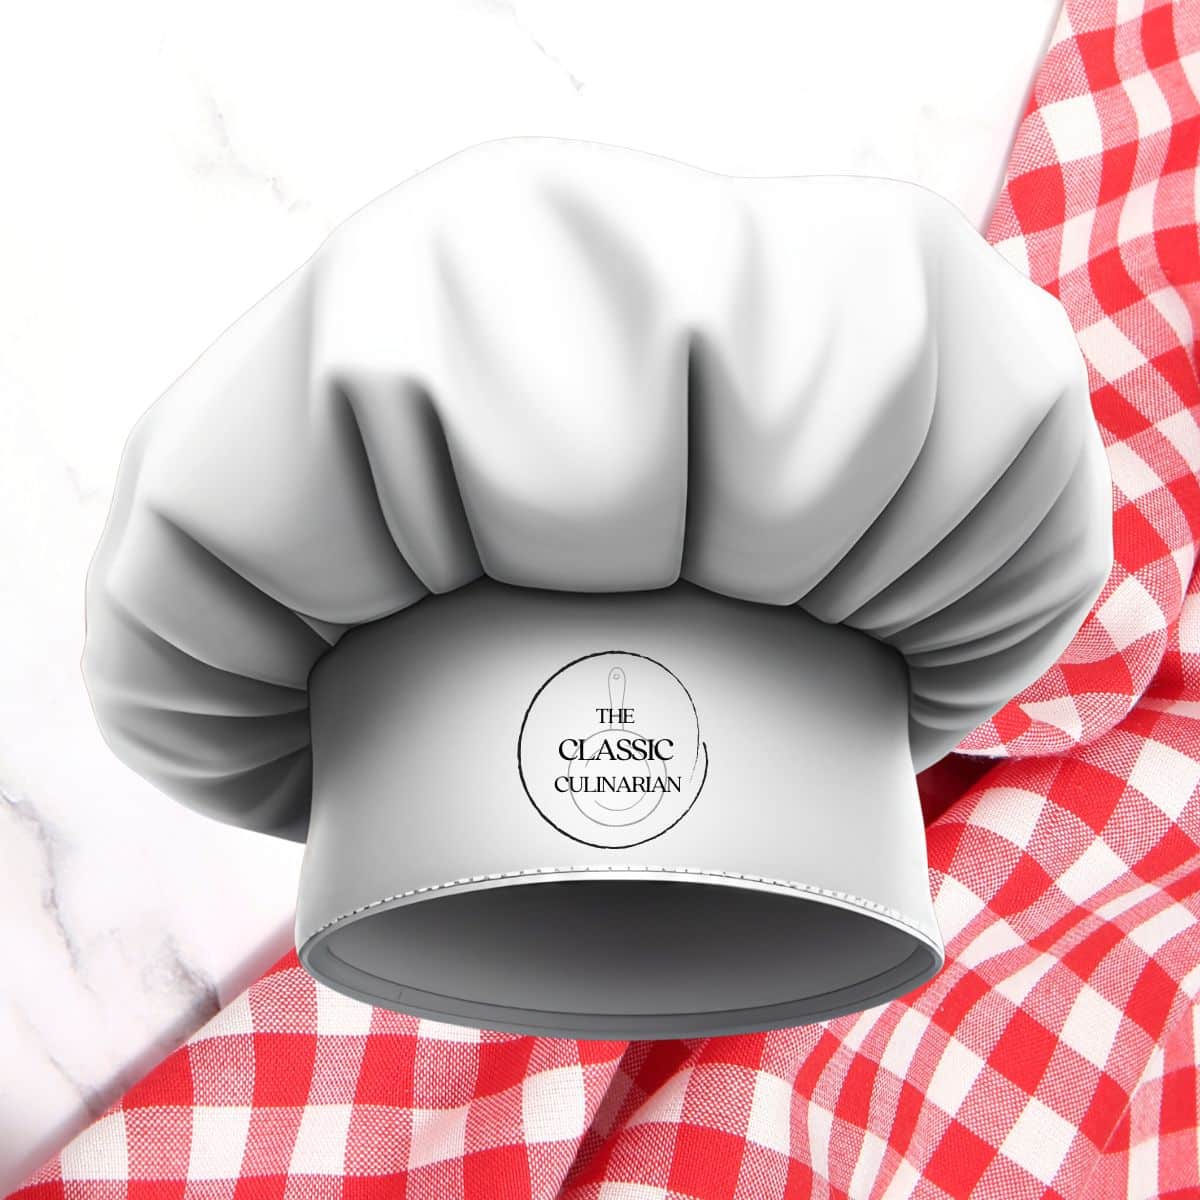 Image of The Classic Culinarian toque with a red & white gingham cloth background.